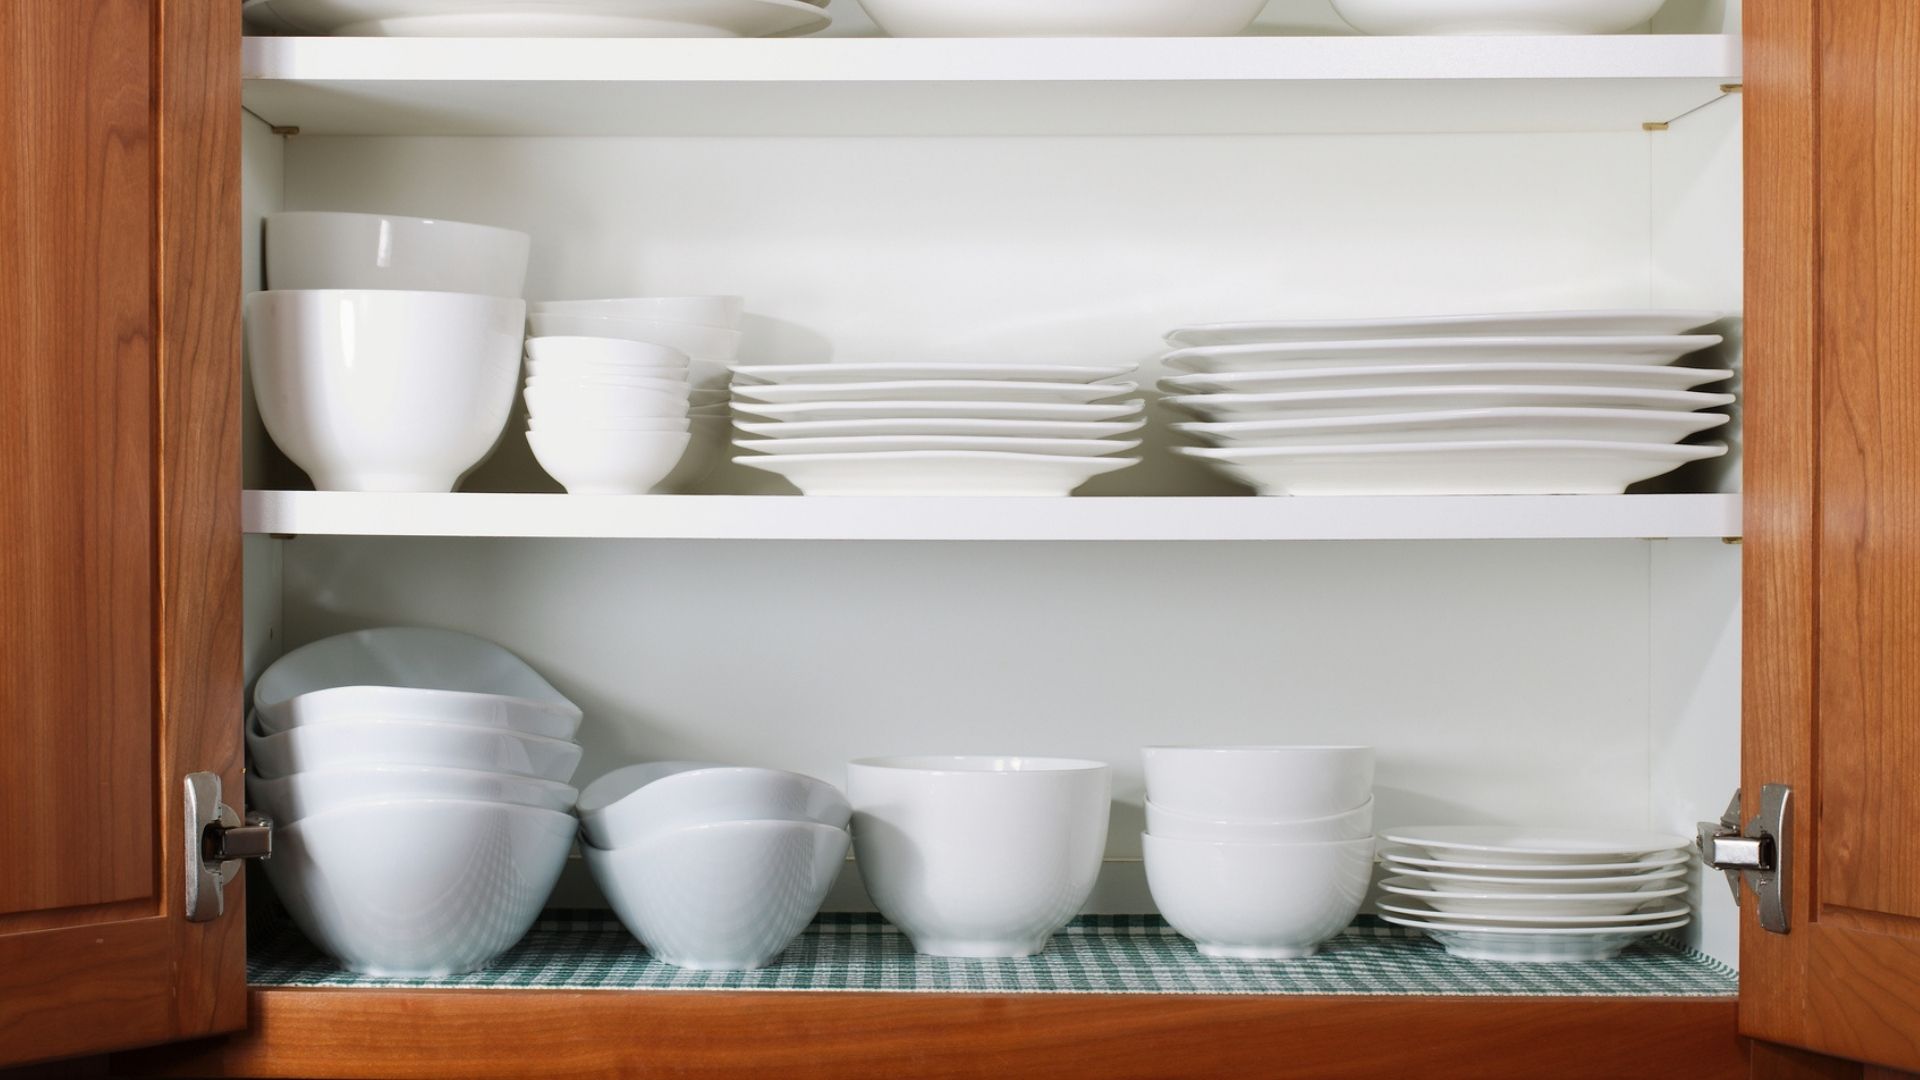 The Benefits and Drawbacks of Kitchen Cabinet Shelf Liners